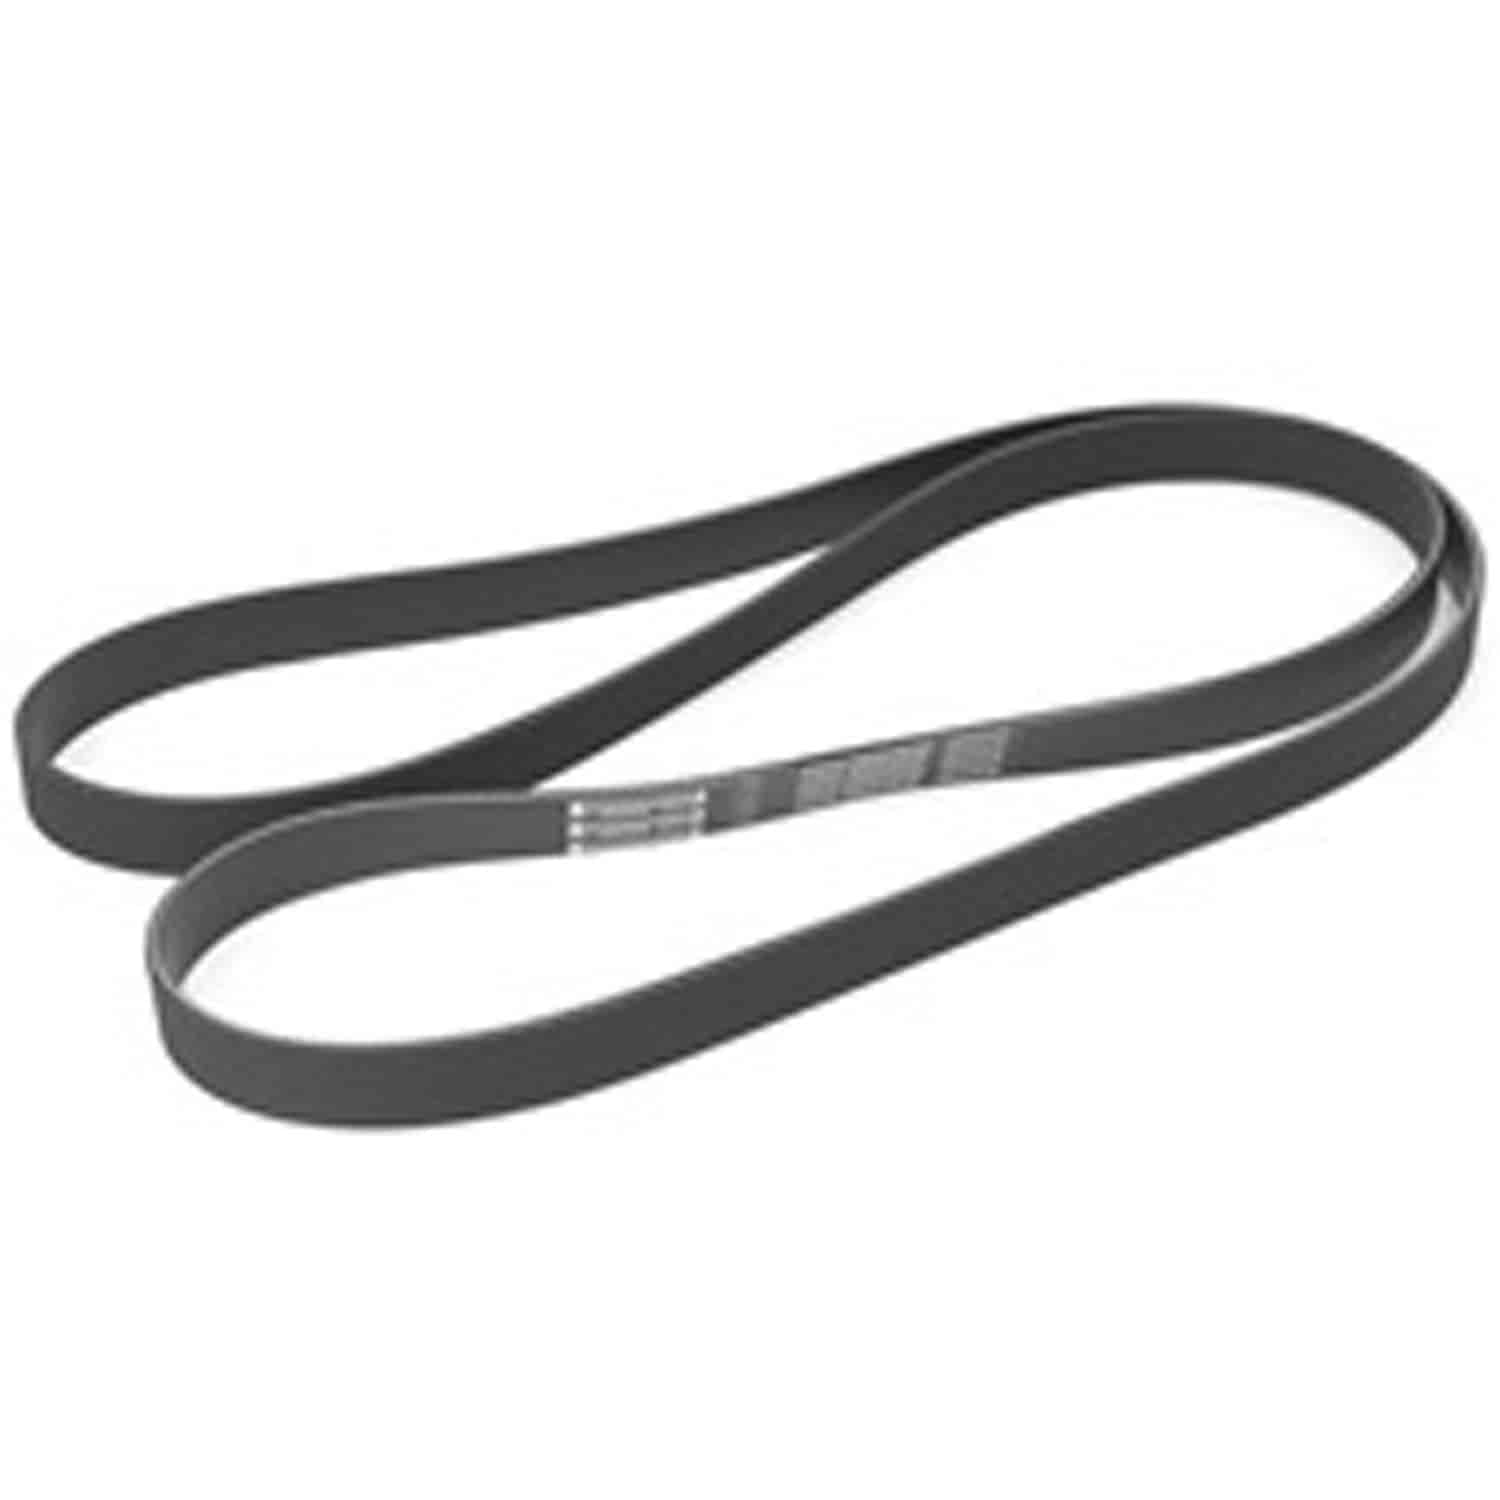 This serpentine belt from Omix-ADA fits 11-14 Jeep Grand Cherokees with a 3.6L engine and mechanical power steering.